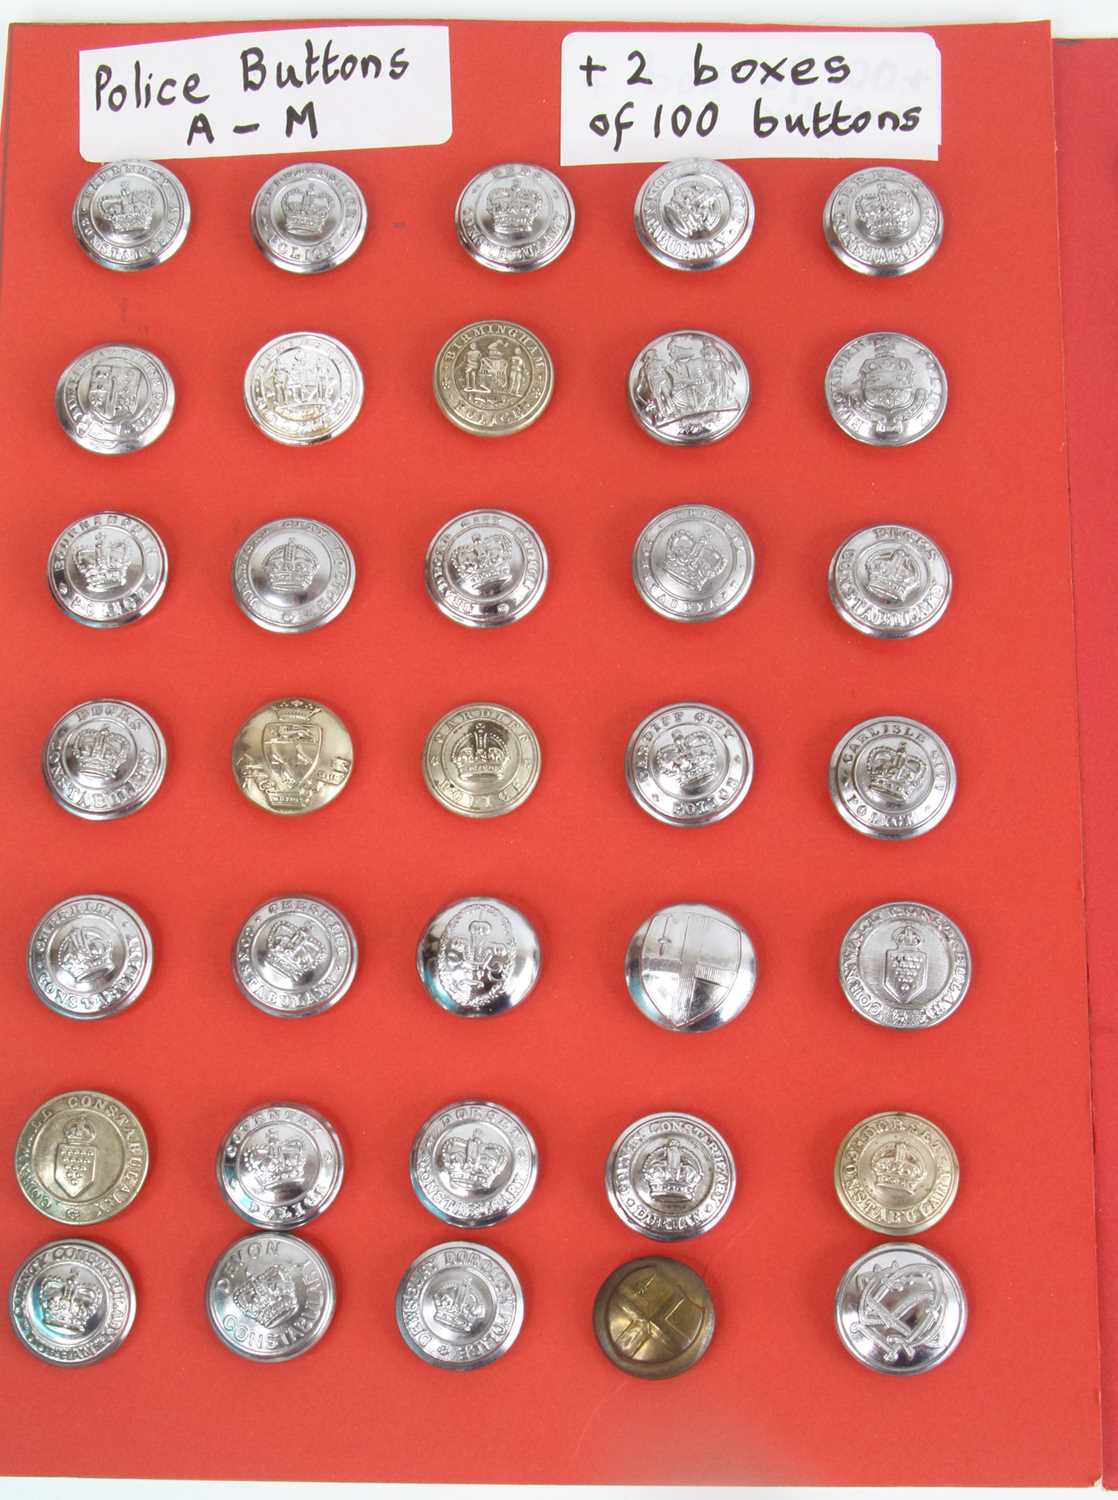 A Large collection of Police uniform buttons arranged alphabetically A-M, M-S & T-Z displayed on - Image 4 of 12